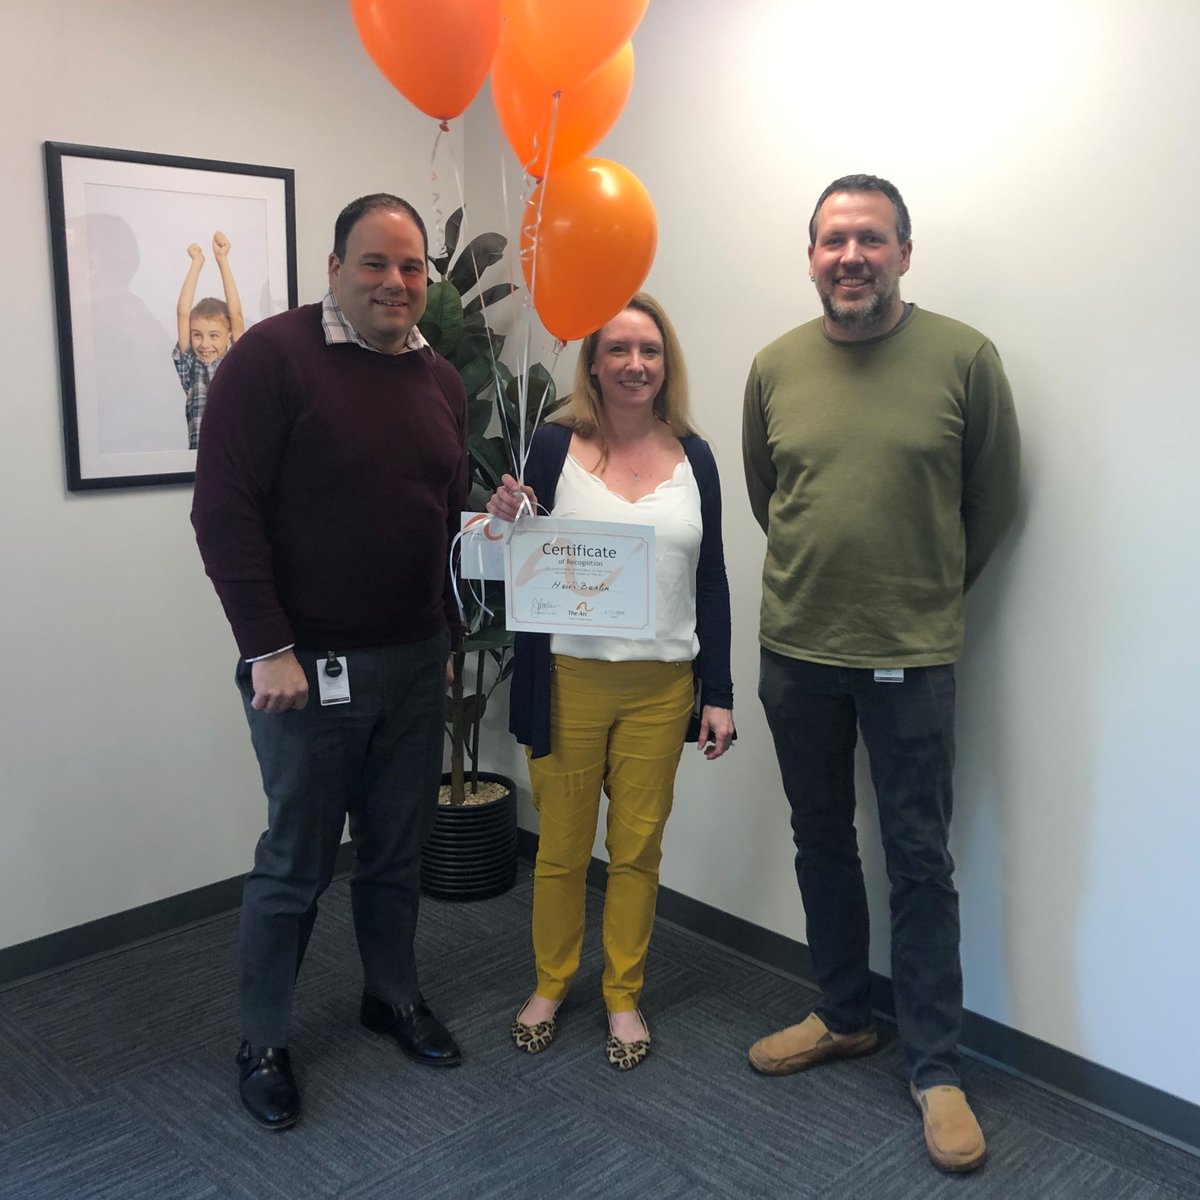 Join us in congratulating Heidi, the Office Manager for our Severn offices, for being one of the five winners of our Employee Recognition & Rewards Program this quarter. Congratulations Heidi!! 🎉 👏

#EmployeeRecognition #EmployeeRewards #SupportingYou